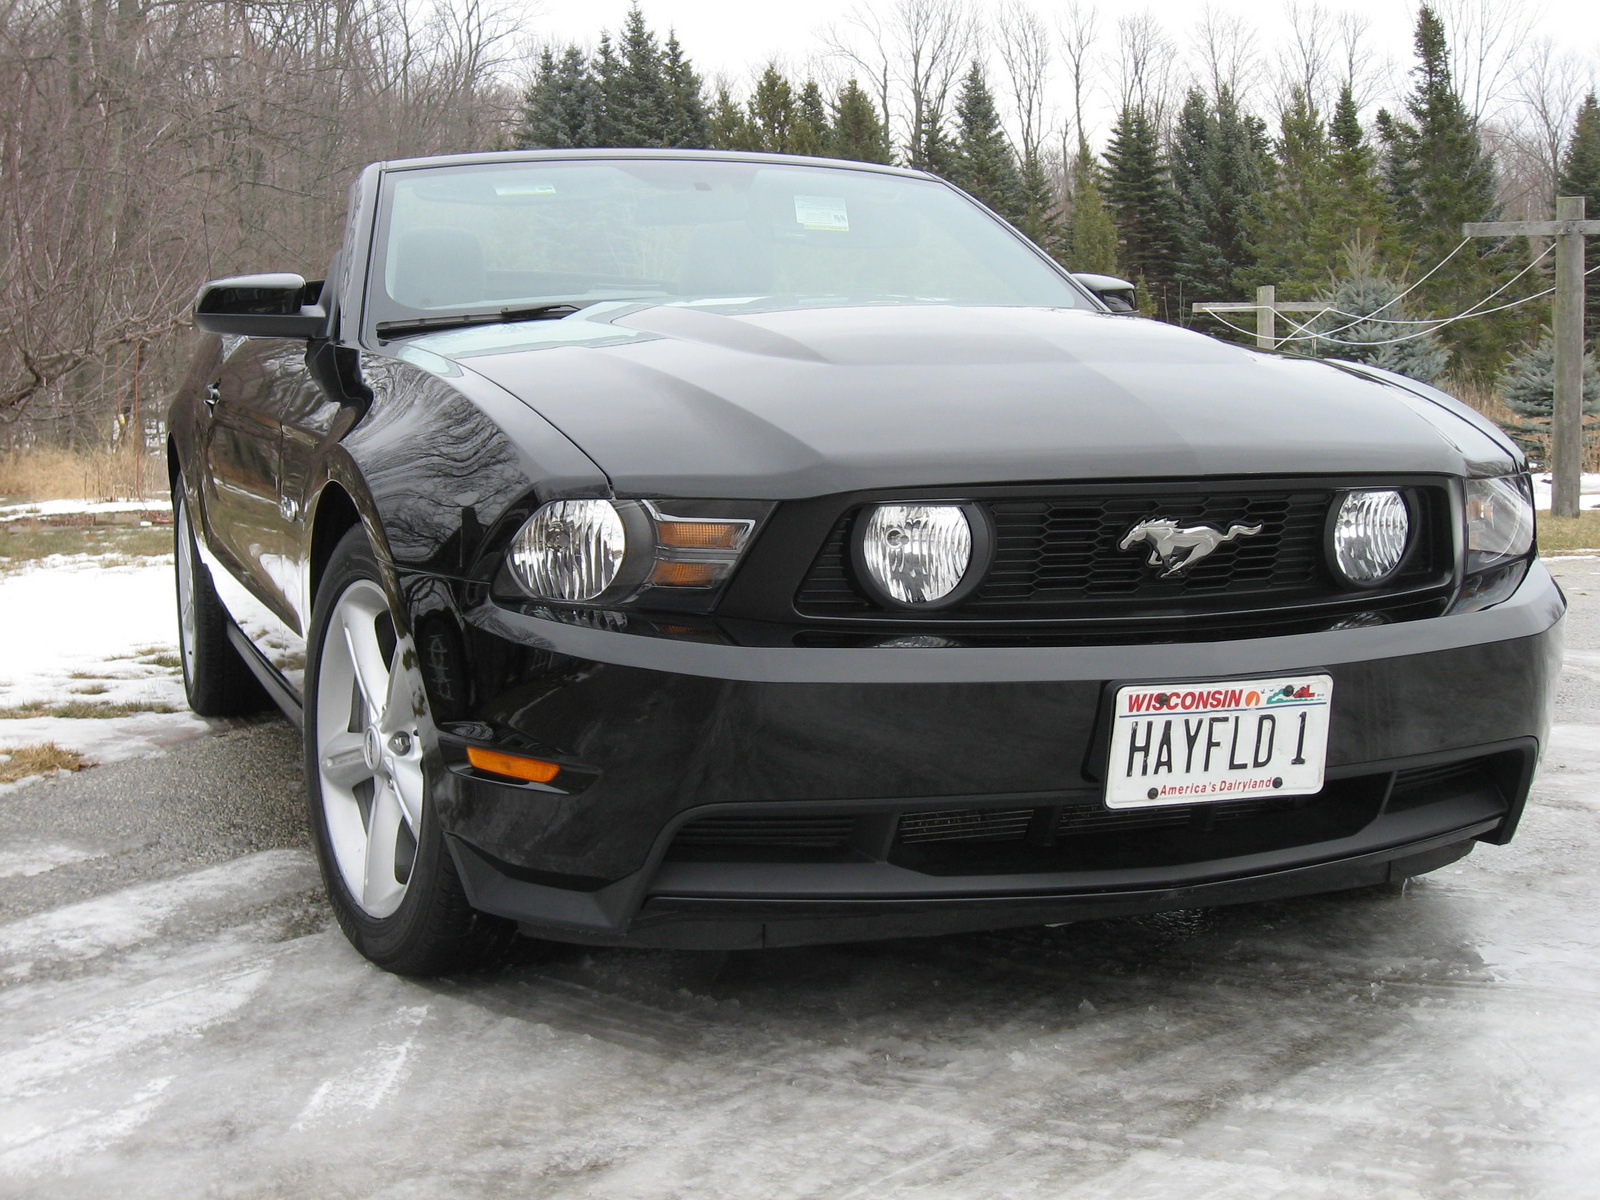 2005 Ford mustang gt owners manual #7